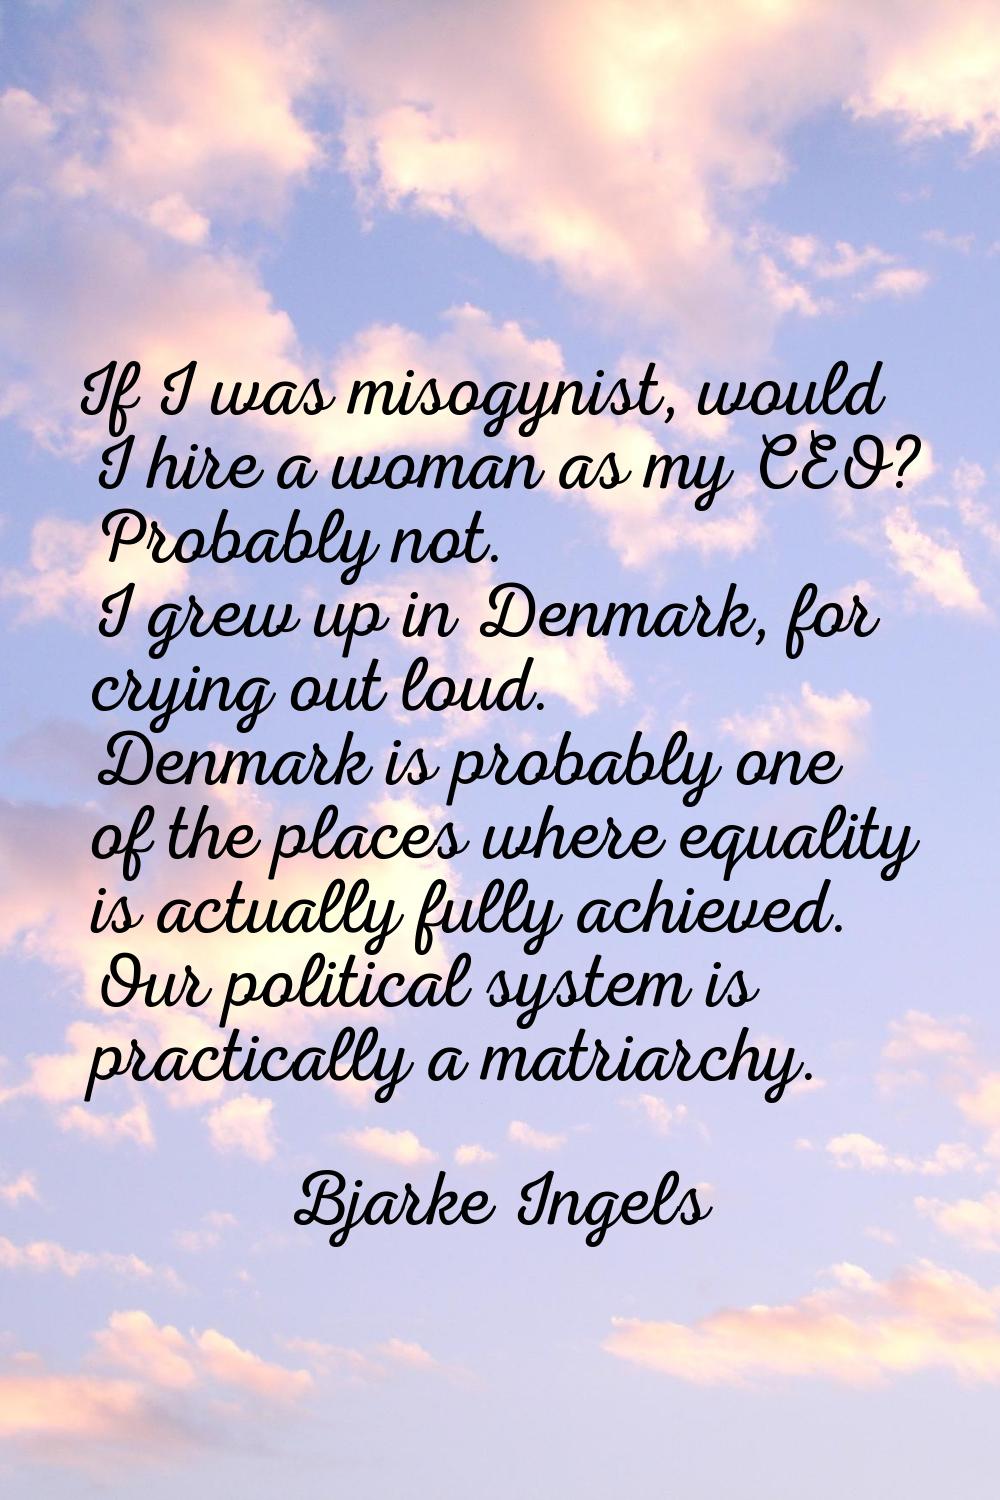 If I was misogynist, would I hire a woman as my CEO? Probably not. I grew up in Denmark, for crying